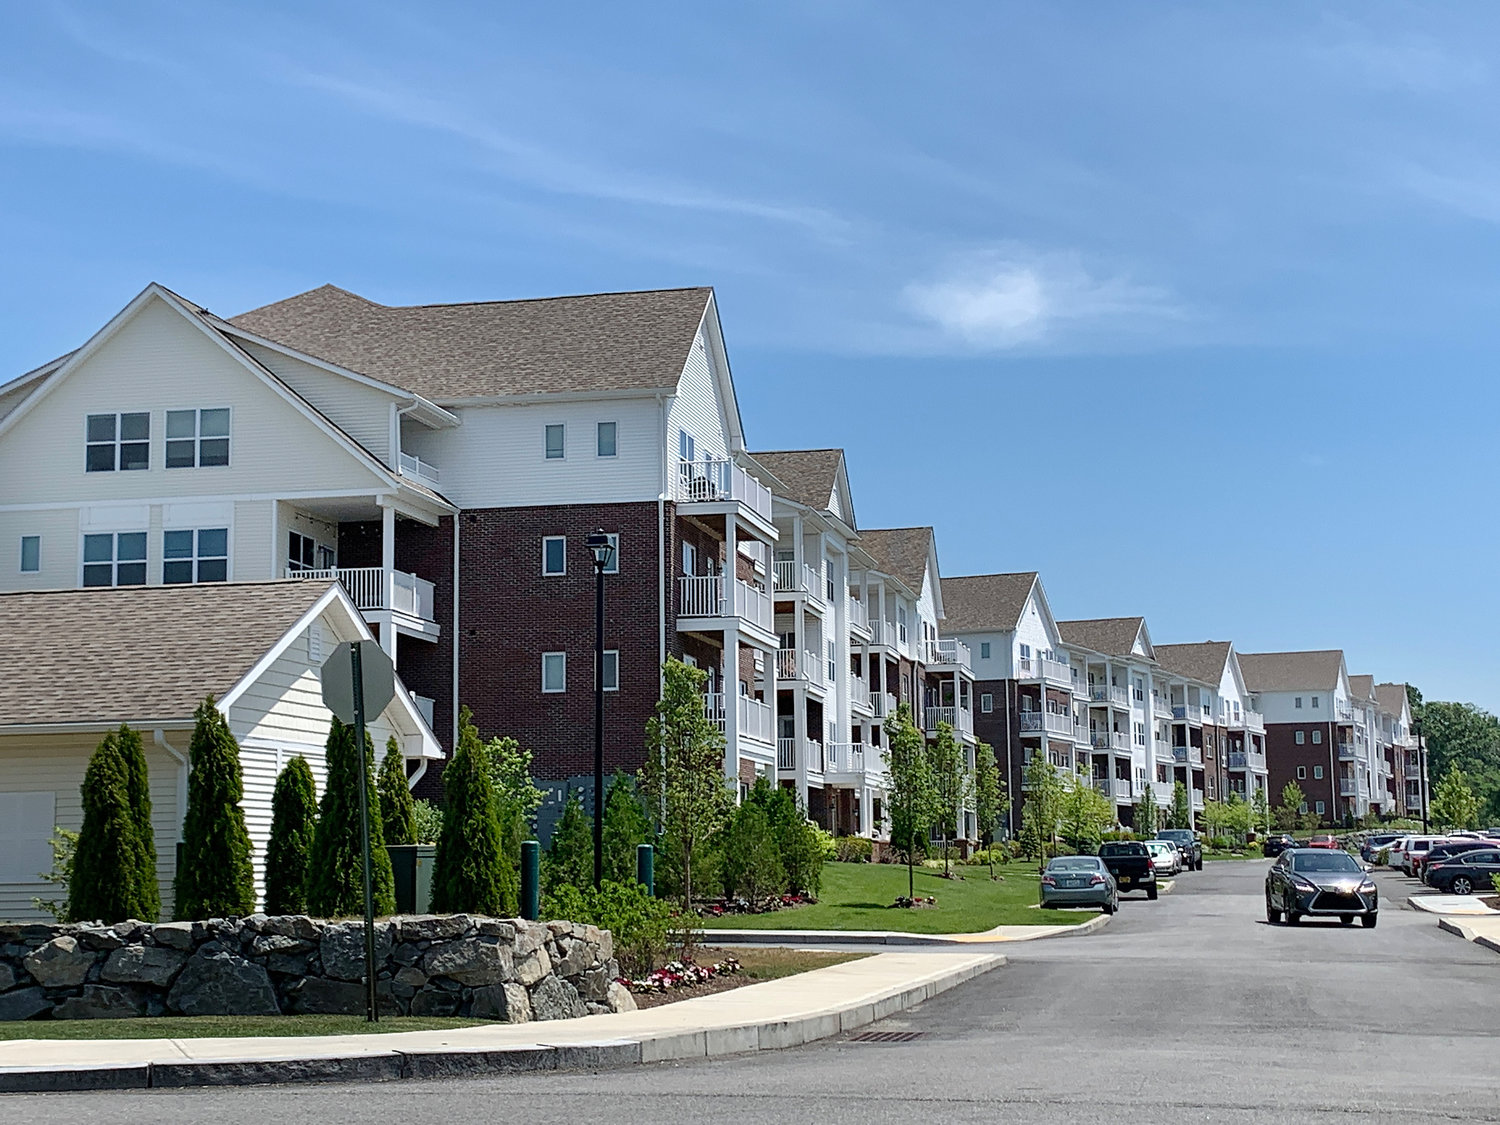 A view looking at a row of apartment buildings inside the Kettle Point development.